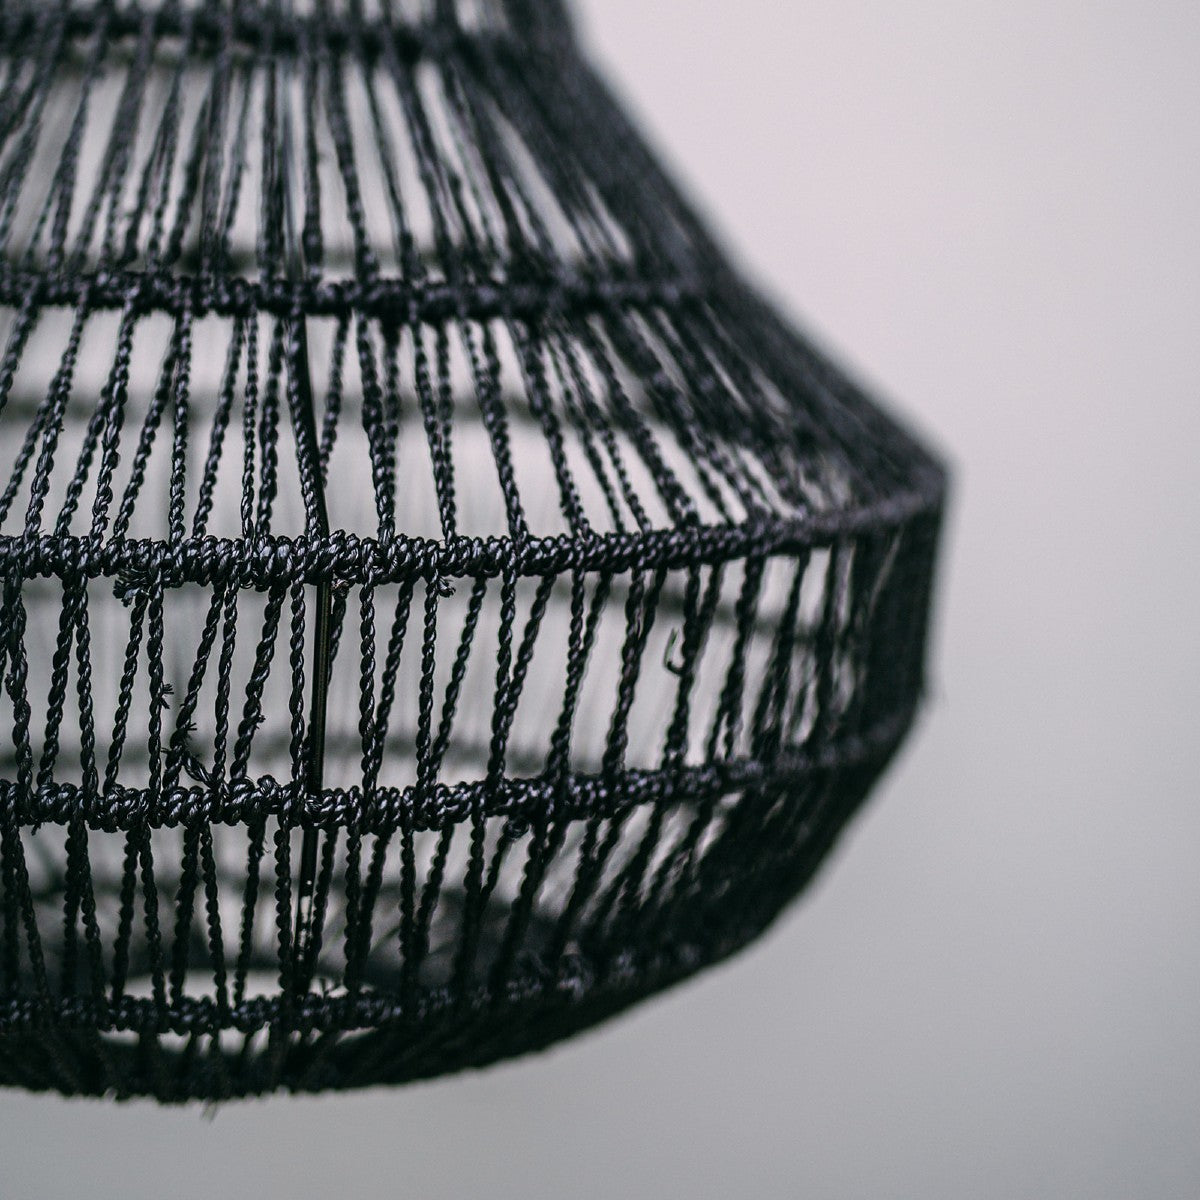 Hamptons seagrass pendant light. image shows close up detail of the seagrass twine woven arounnd the light shade frame.